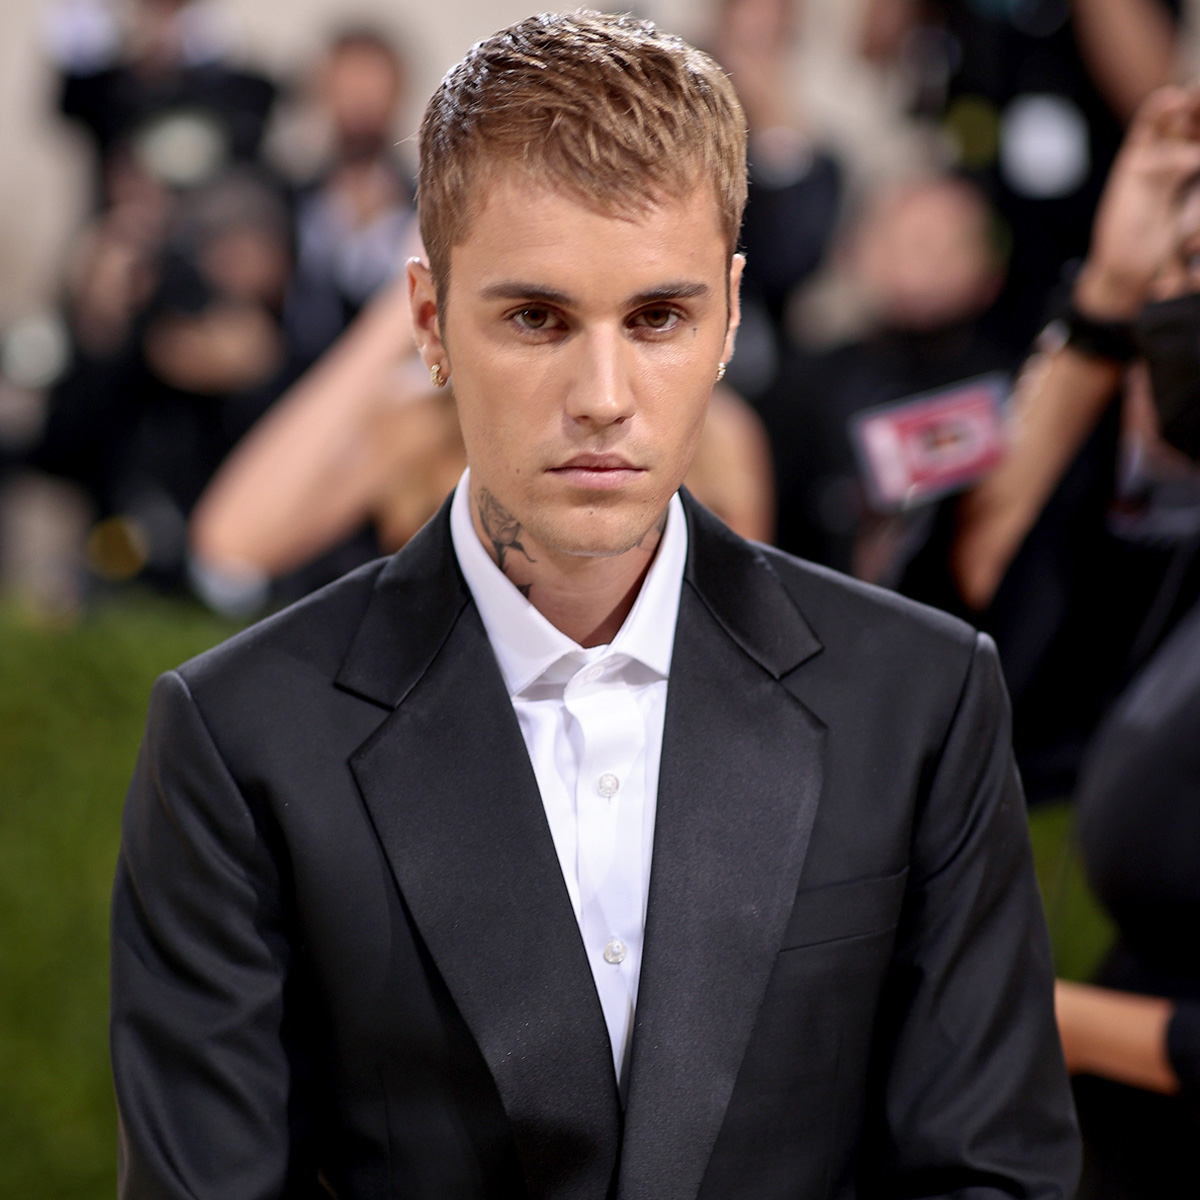 Justin Bieber Says It’s Getting “Harder to Eat” After New Diagnosis